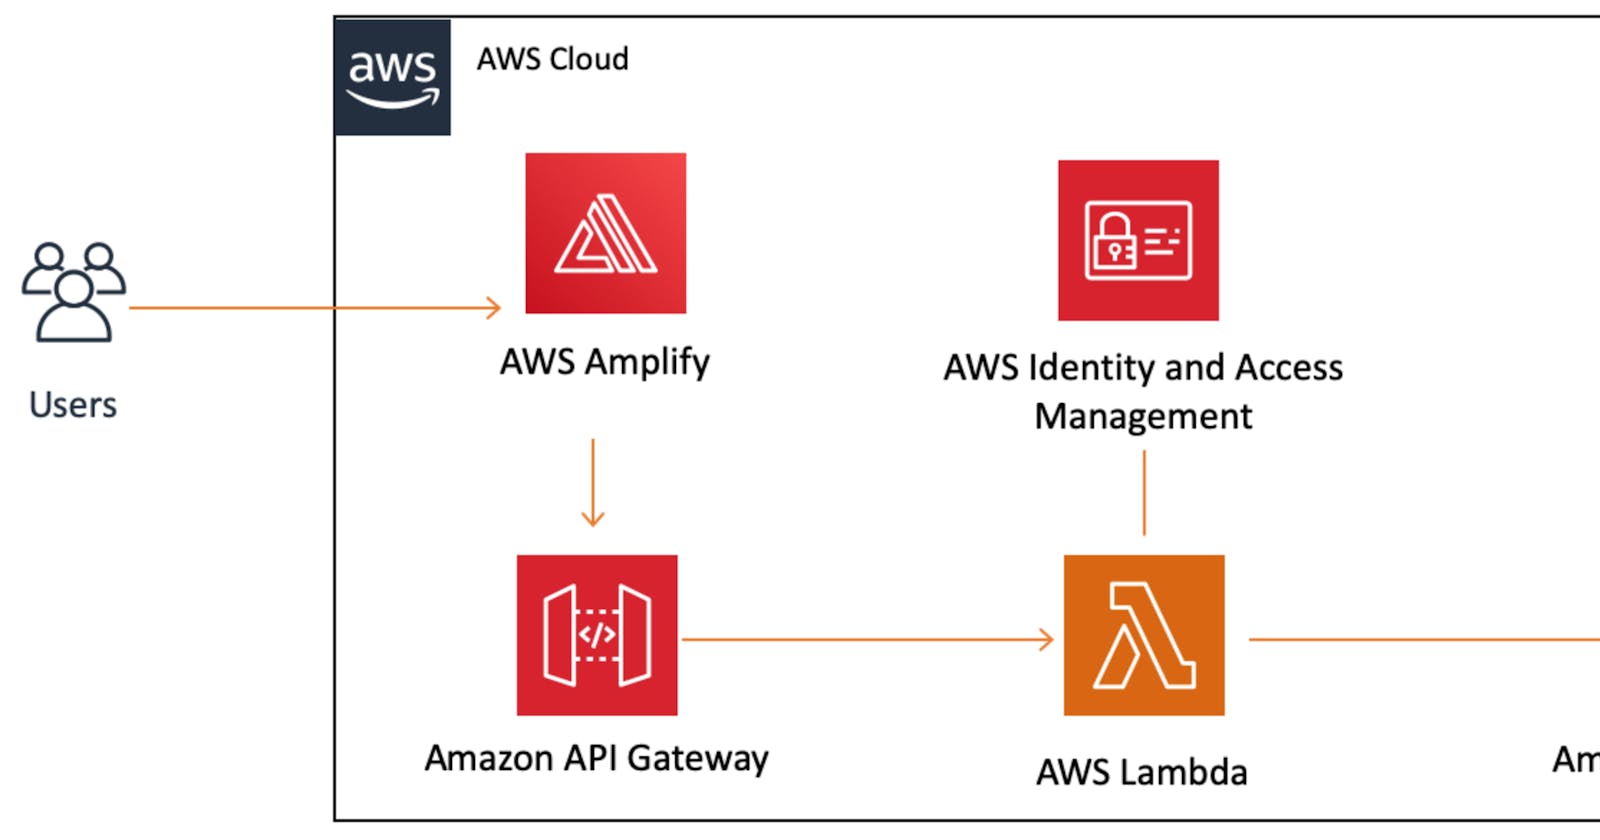 Beginners: Build a Basic a "Full Stack" Web Application with AWS